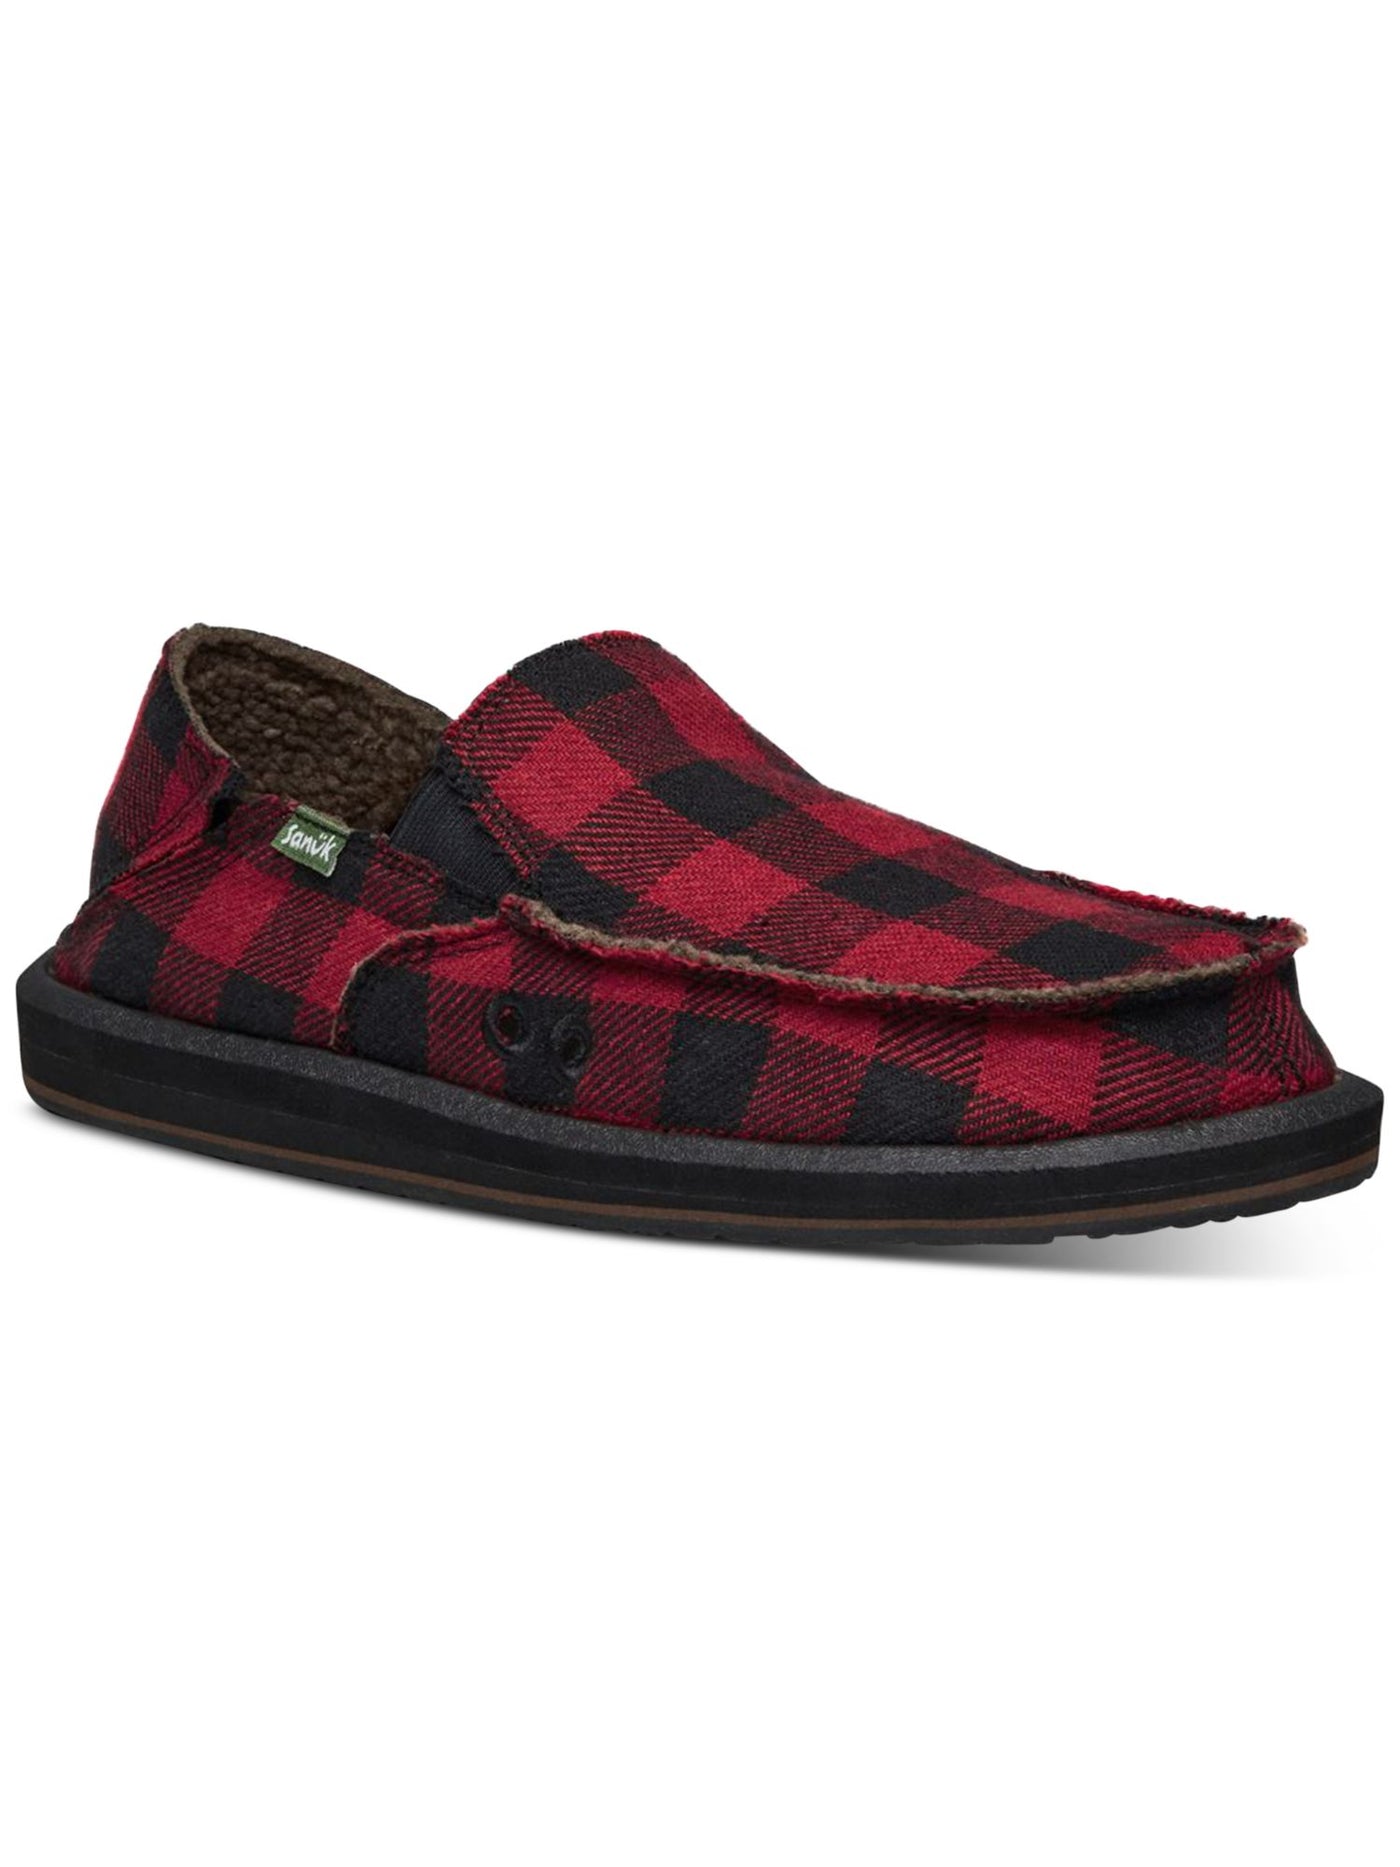 SANUK Mens Red Plaid Buffalo Padded Goring Comfort Vagabond Chill Round Toe Slip On Loafers Shoes 10 M